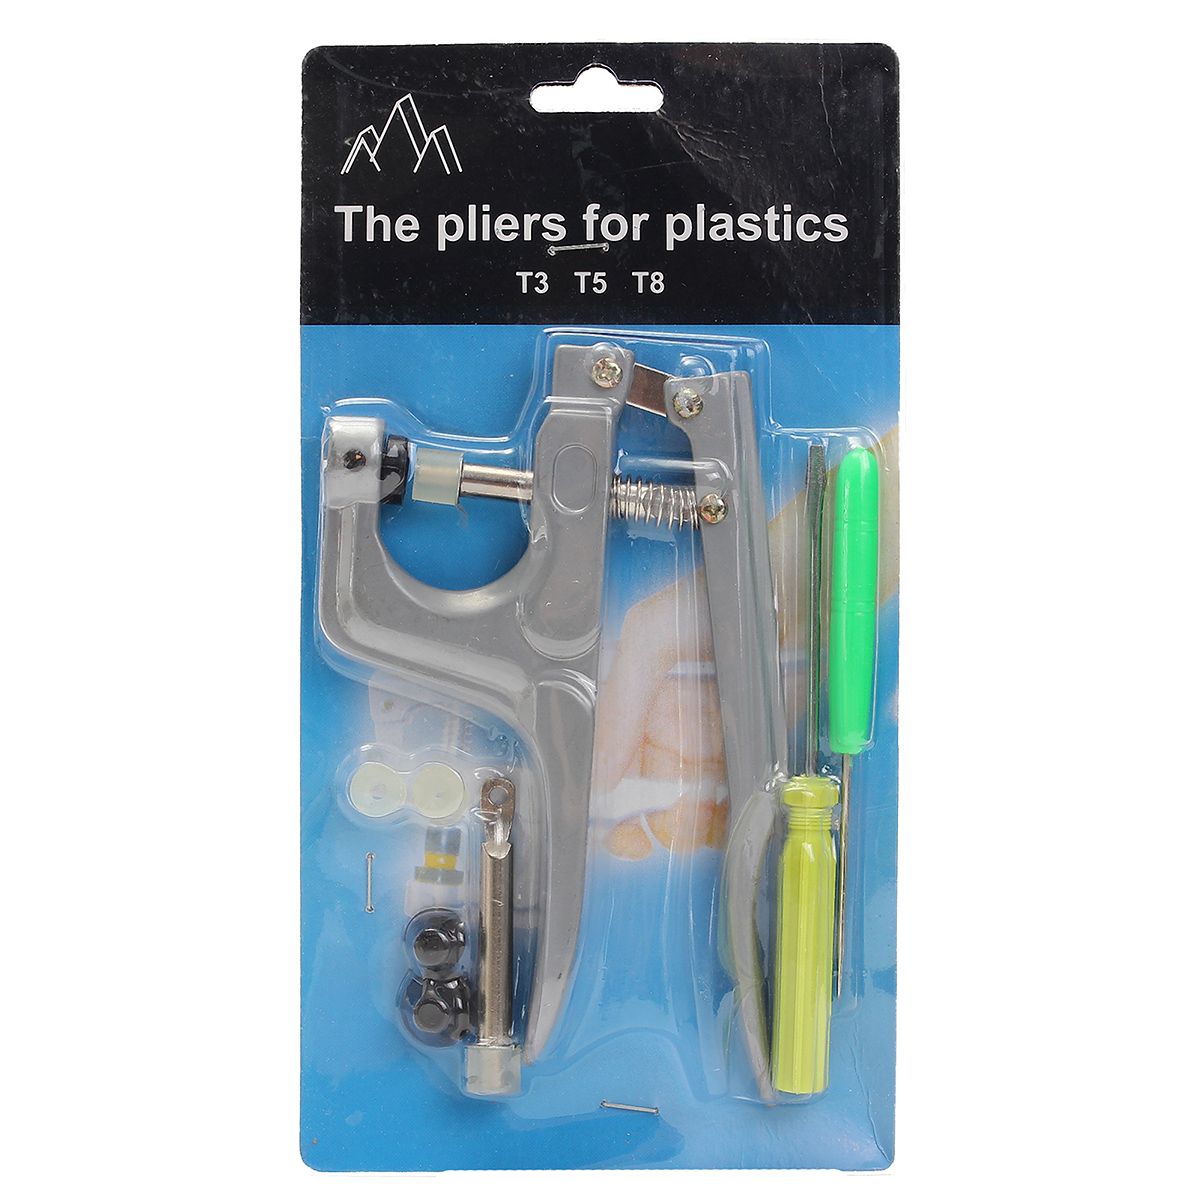 Clothes-Button-Fastener-Snap-Plier-with-150Set-Colorful-T5-Snap-Plastic-Buttons-1084129